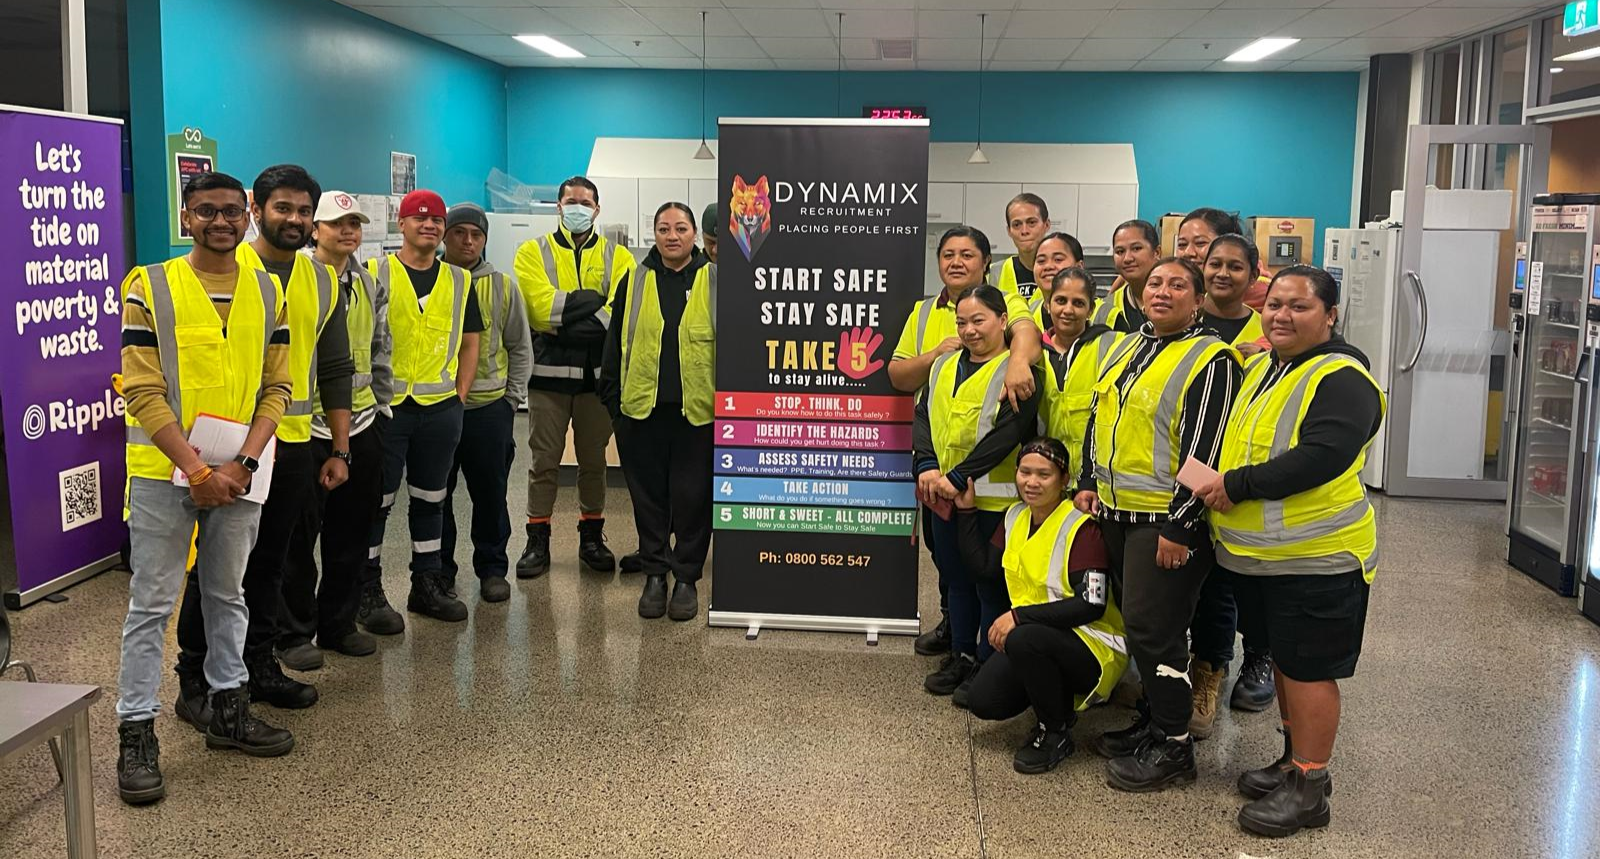 Starting Safe and Staying Safe with Dynamix